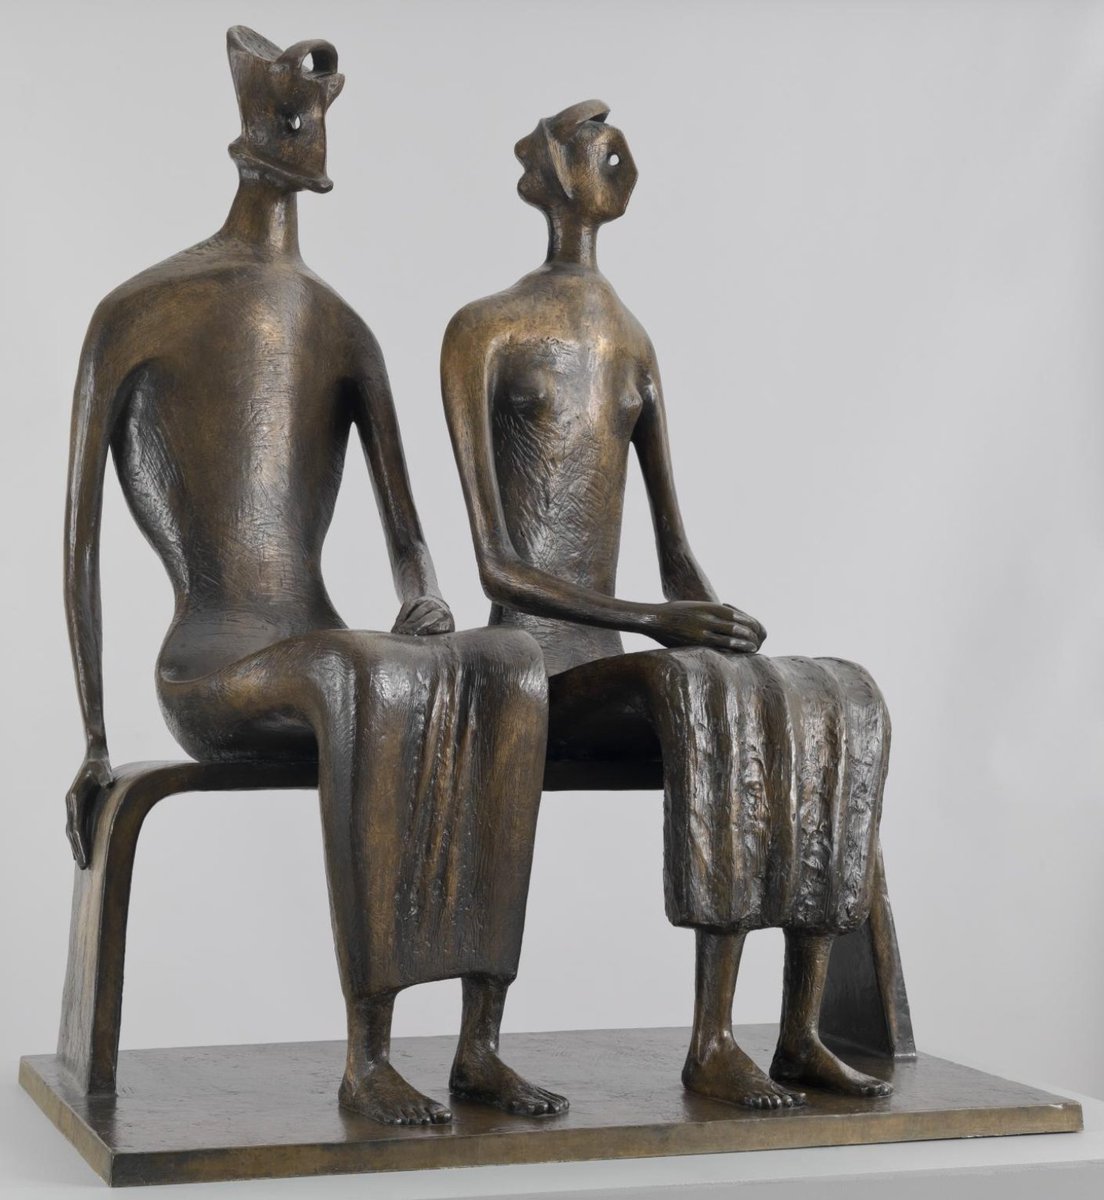 Making her @after_poetry debut this May #newmoon is @GGeorgiahilton, with a poem inspired by Henry Moore's sculpture, 'King and Queen'. 'We are not gold' began life as an email prompt in an online course run by @wondykitten back in 2021. Read it for free tomorrow from 9pm BST.